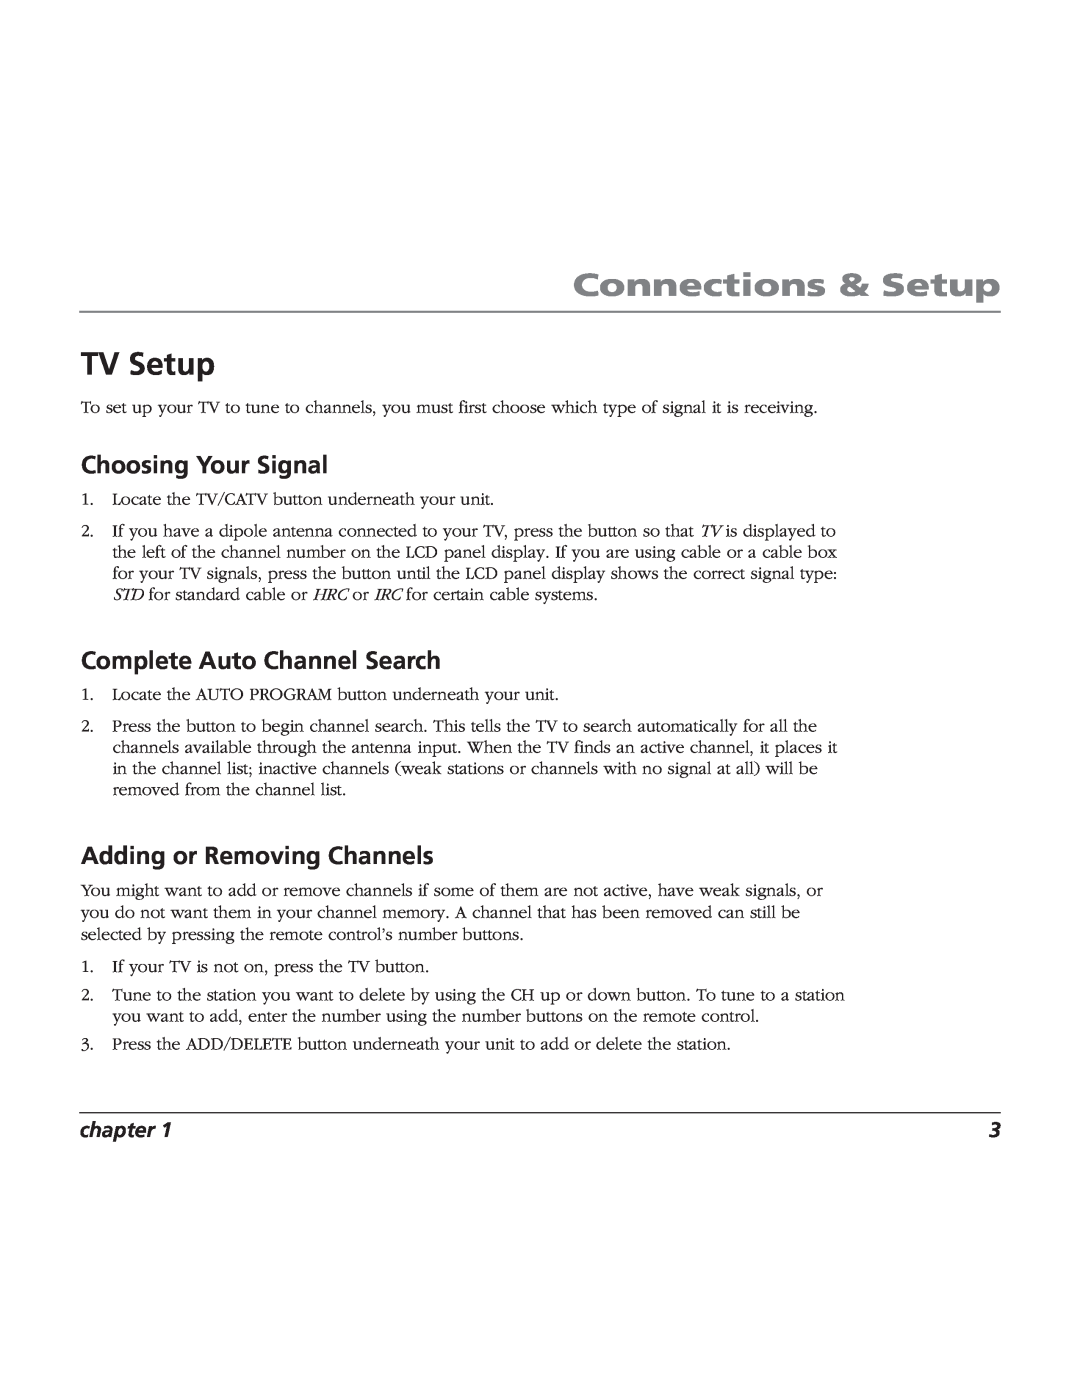 RCA TV/Radio/CD Player TV Setup, Choosing Your Signal, Complete Auto Channel Search, Adding or Removing Channels, chapter 